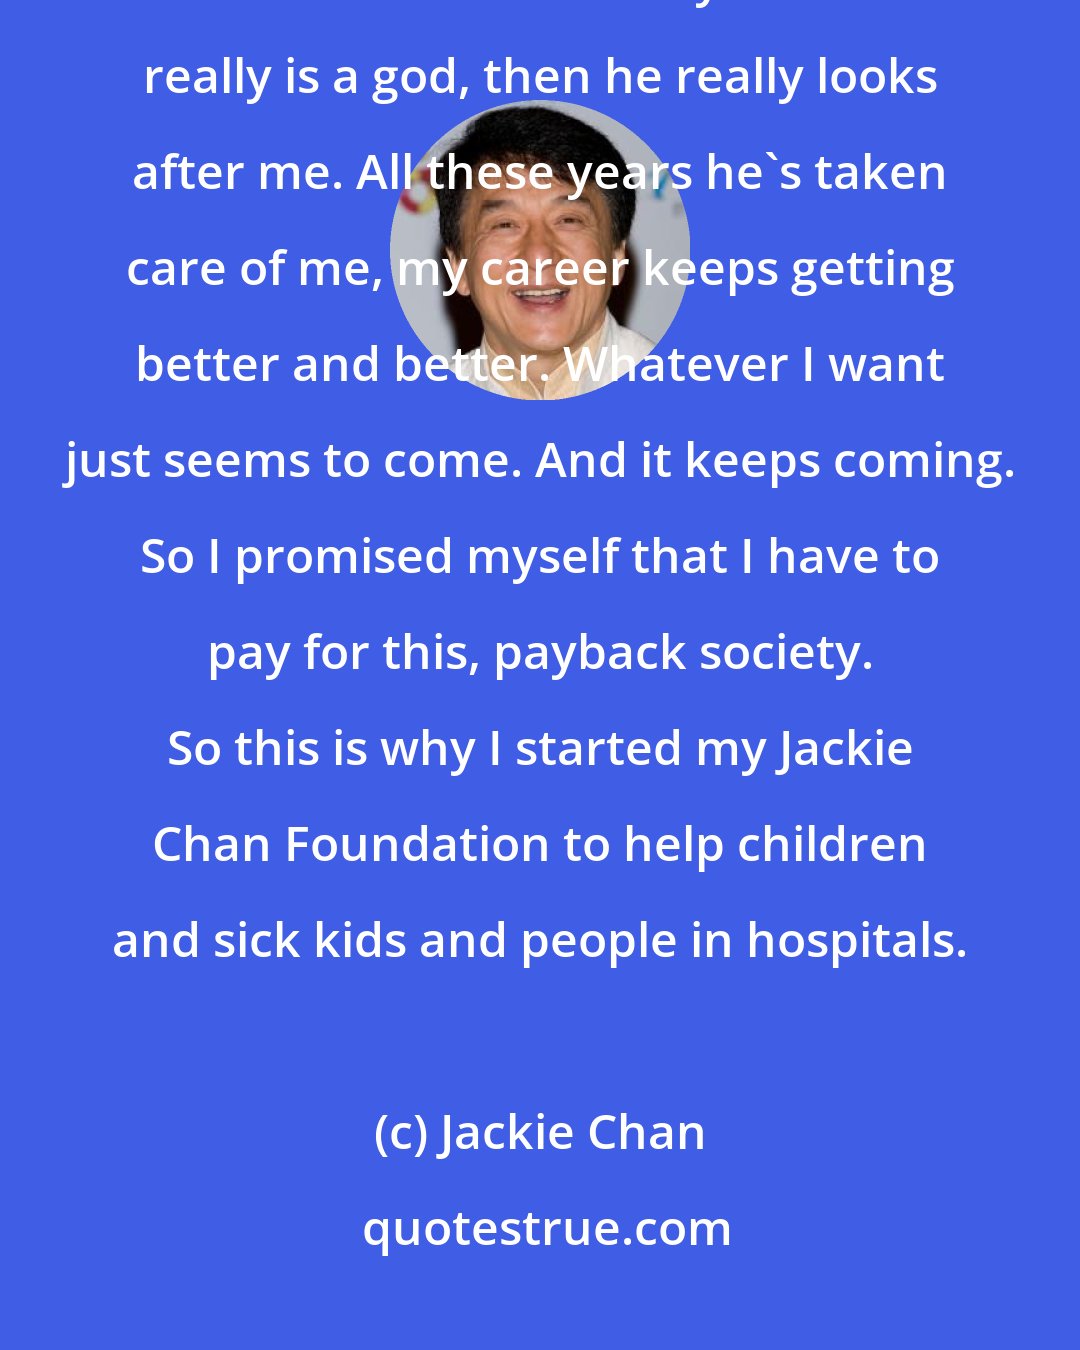 Jackie Chan: Most of the time I'm not even working, I'm just helping people, because I feel that I am too lucky. If there really is a god, then he really looks after me. All these years he's taken care of me, my career keeps getting better and better. Whatever I want just seems to come. And it keeps coming. So I promised myself that I have to pay for this, payback society. So this is why I started my Jackie Chan Foundation to help children and sick kids and people in hospitals.